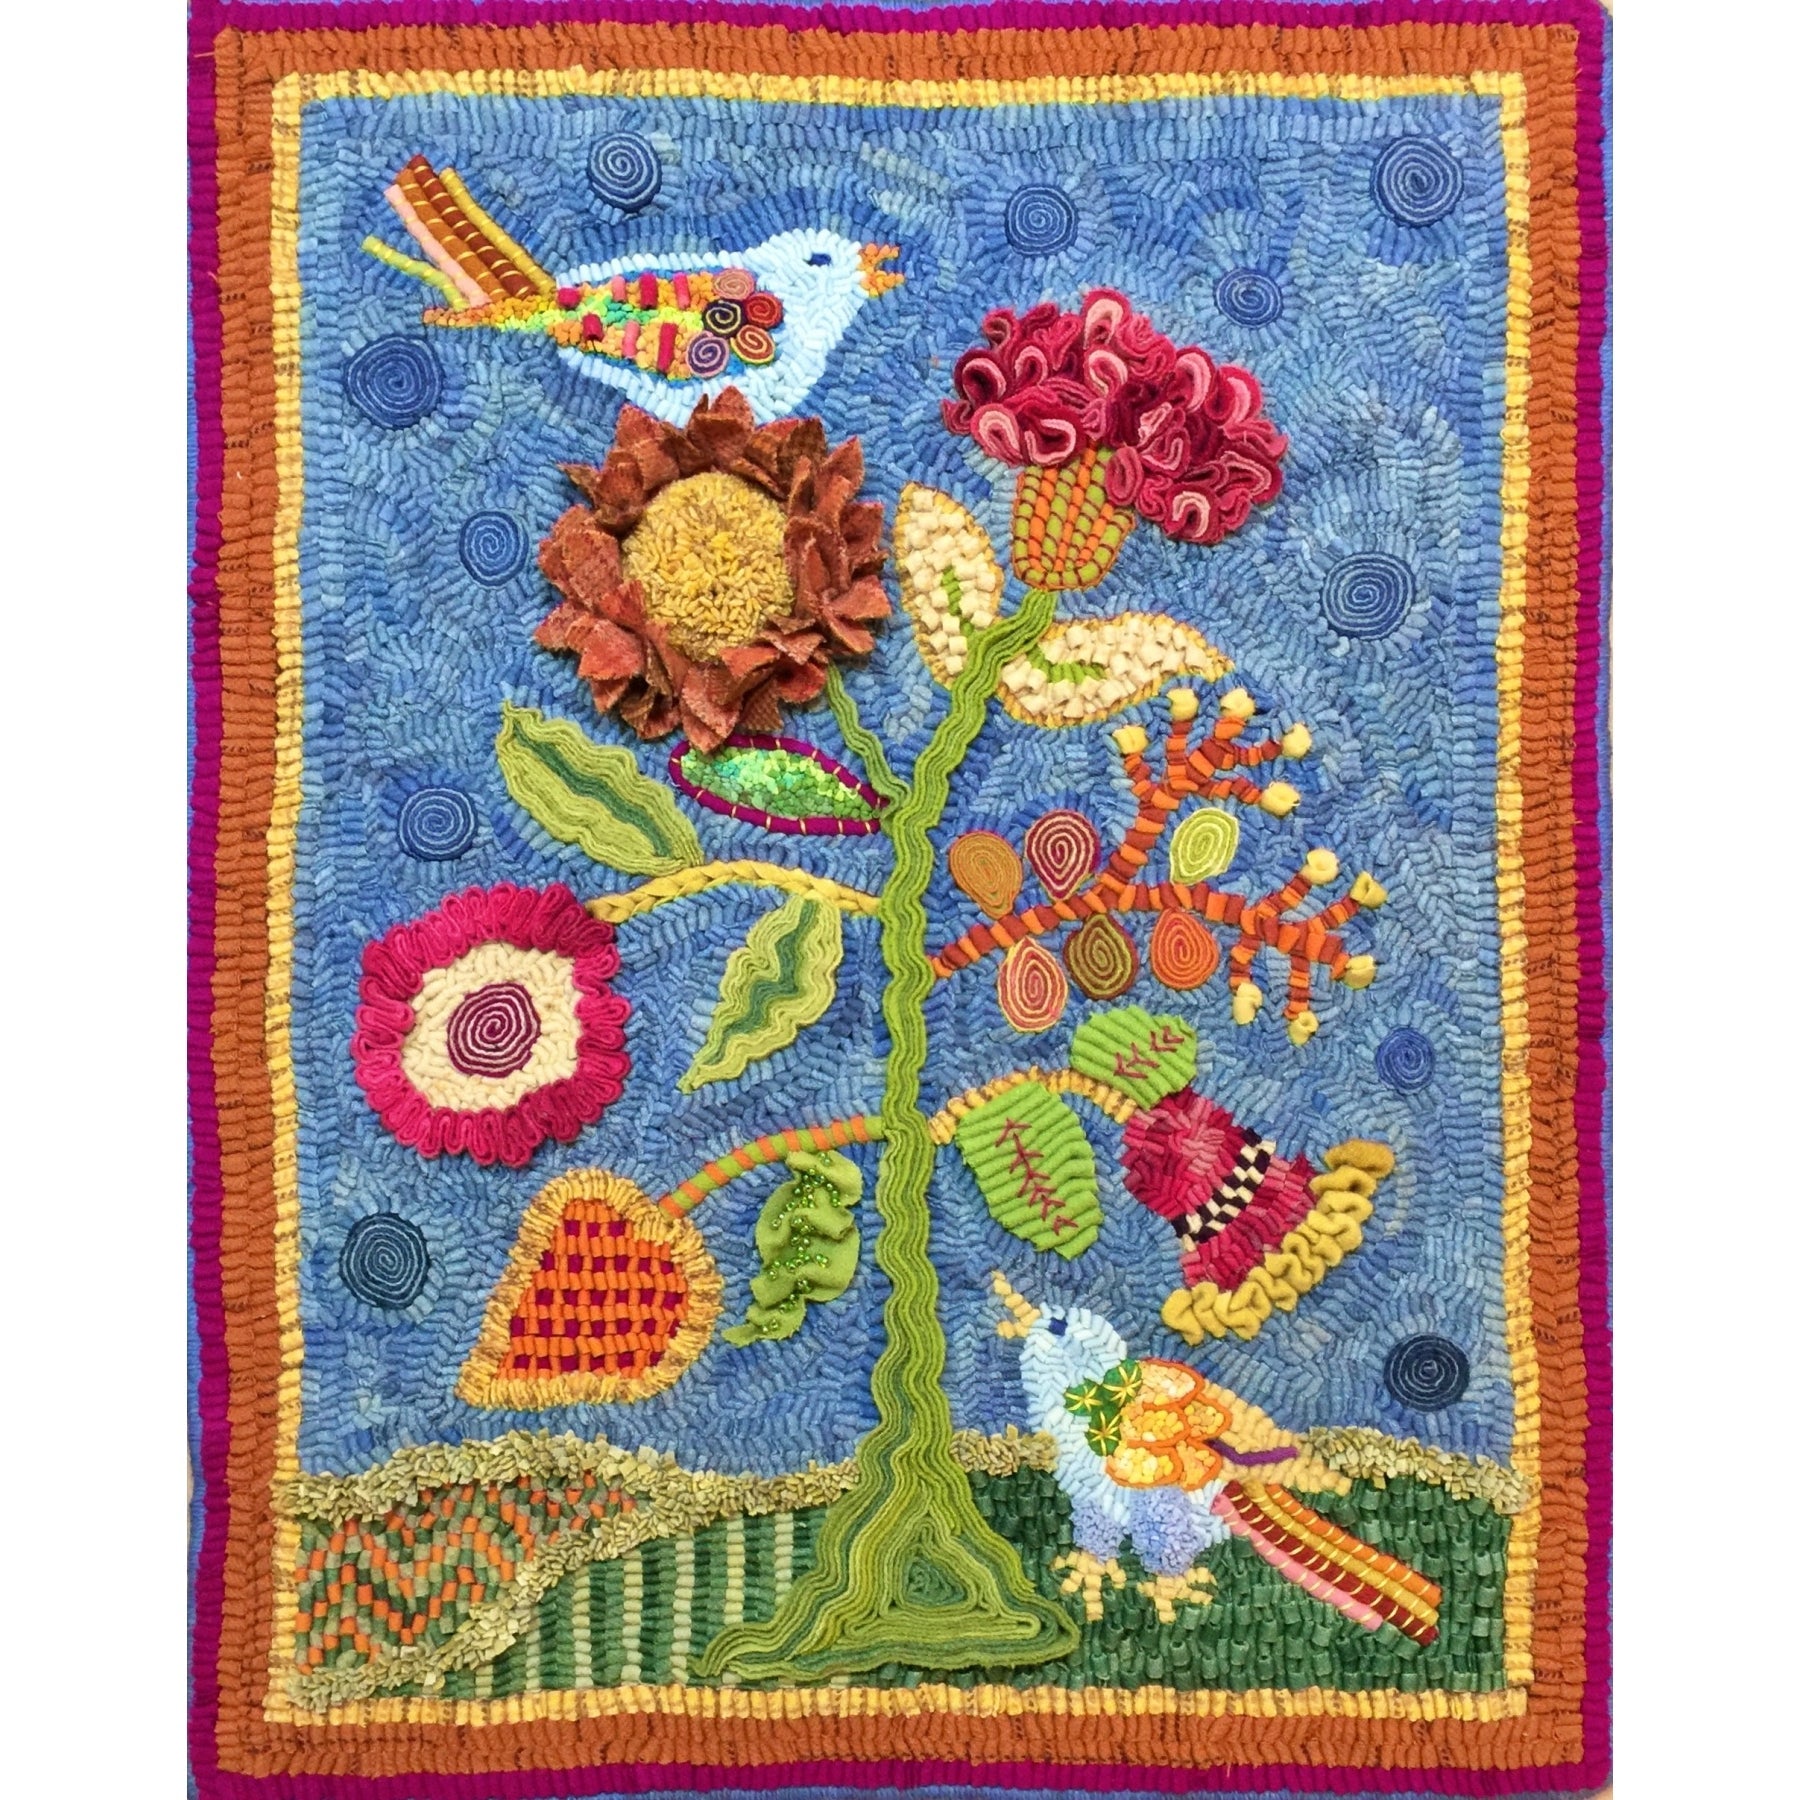 Fanciful Tree of Life, rug hooked by Martha Lowry